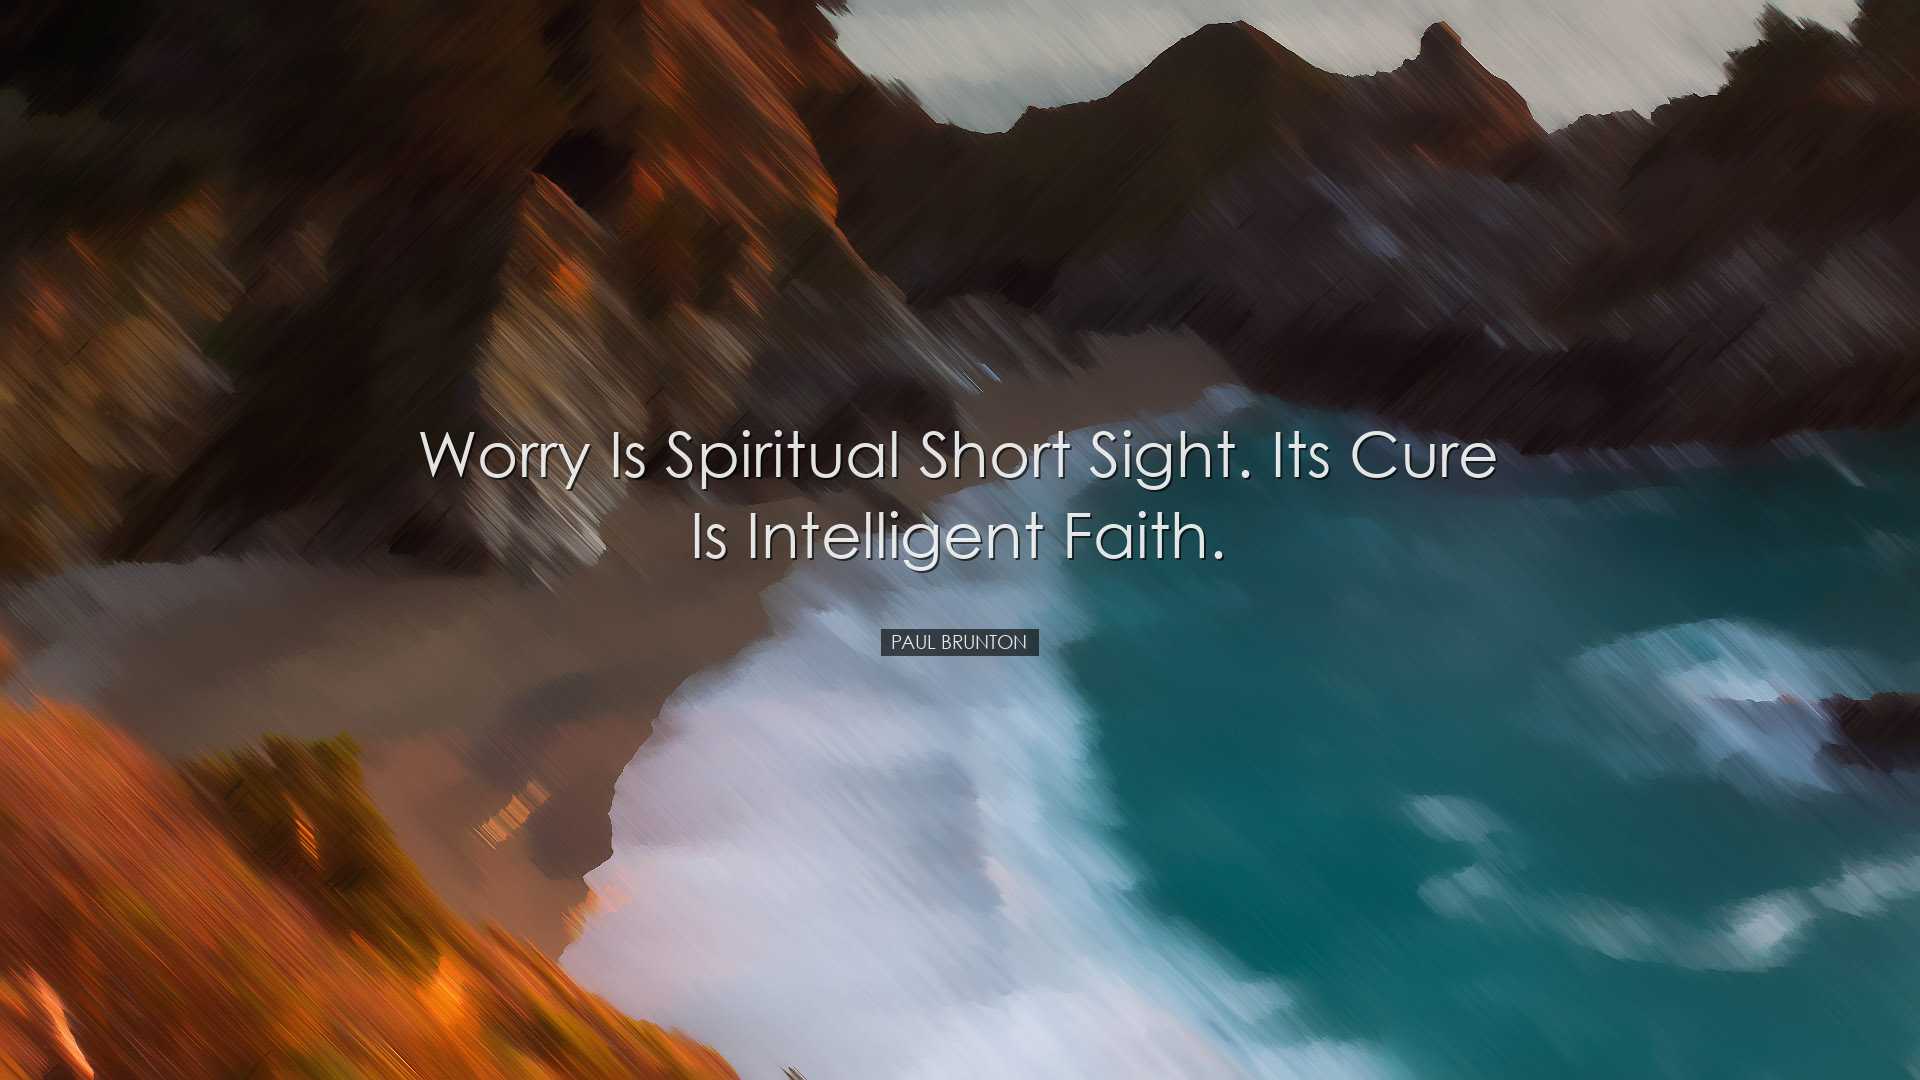 Worry is spiritual short sight. Its cure is intelligent faith. - P